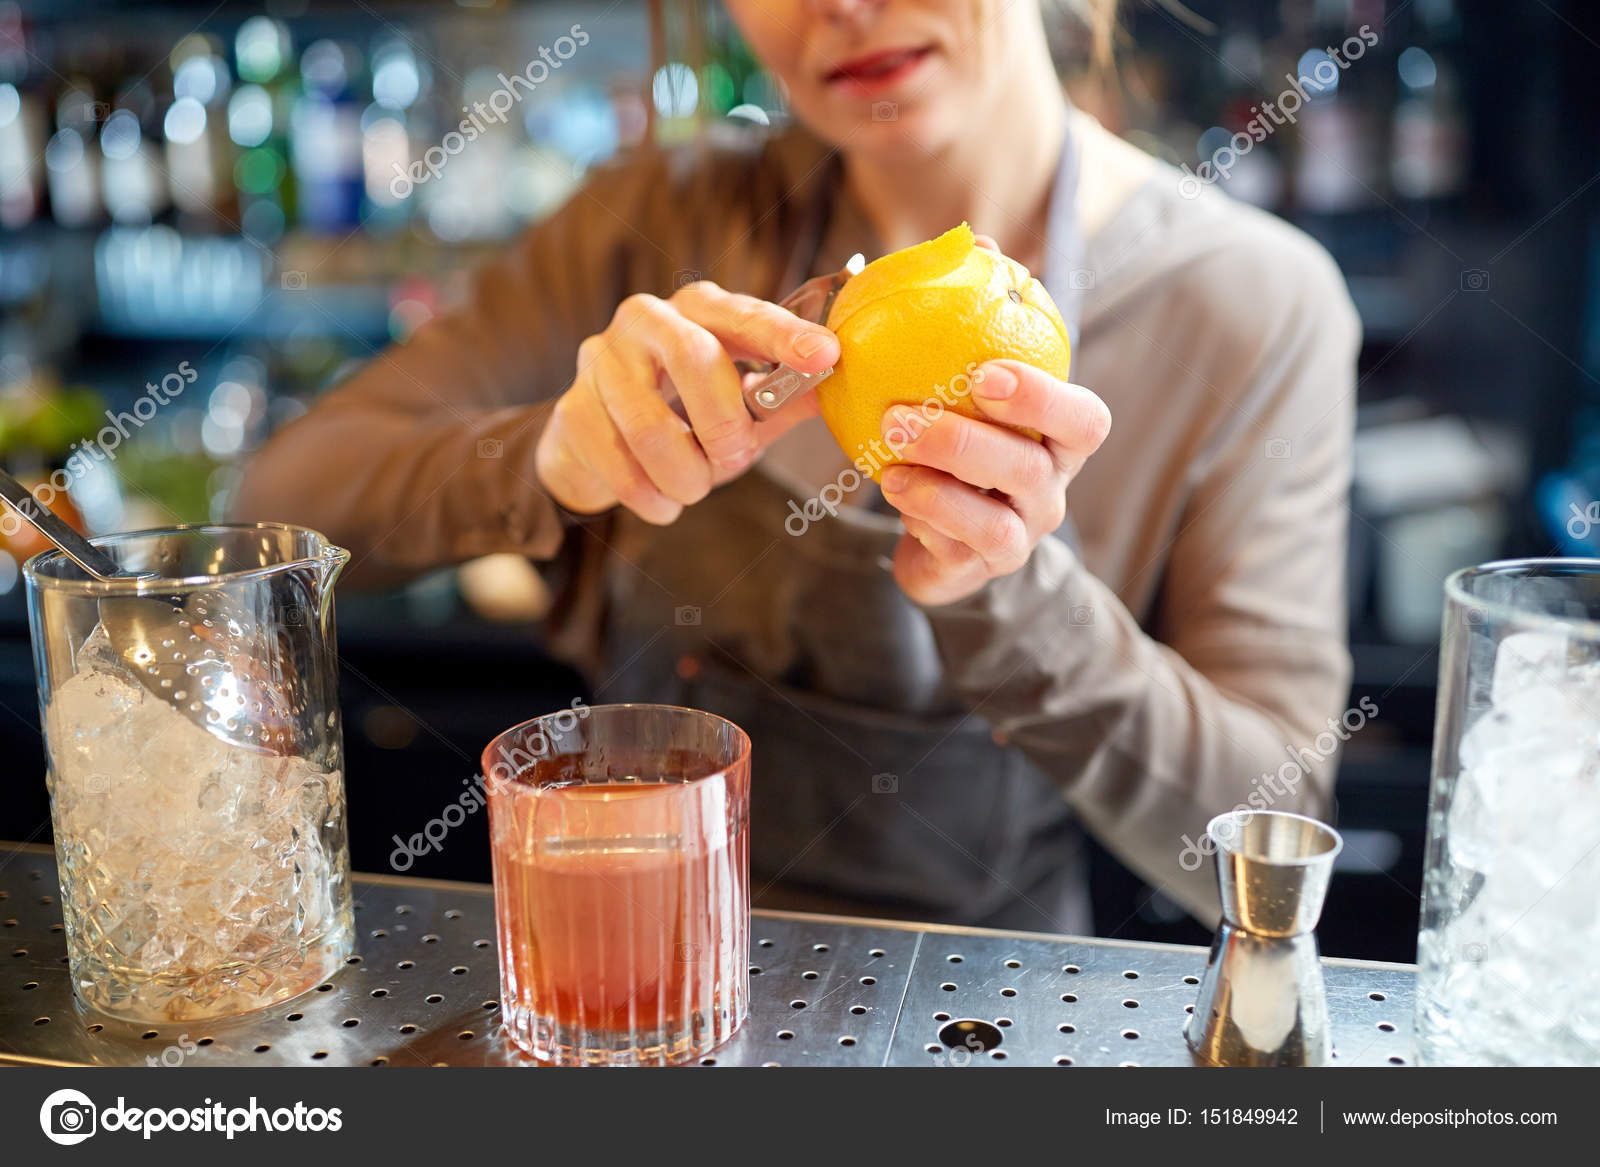 Bartender peels orange peel for cocktail at bar Stock Photo by